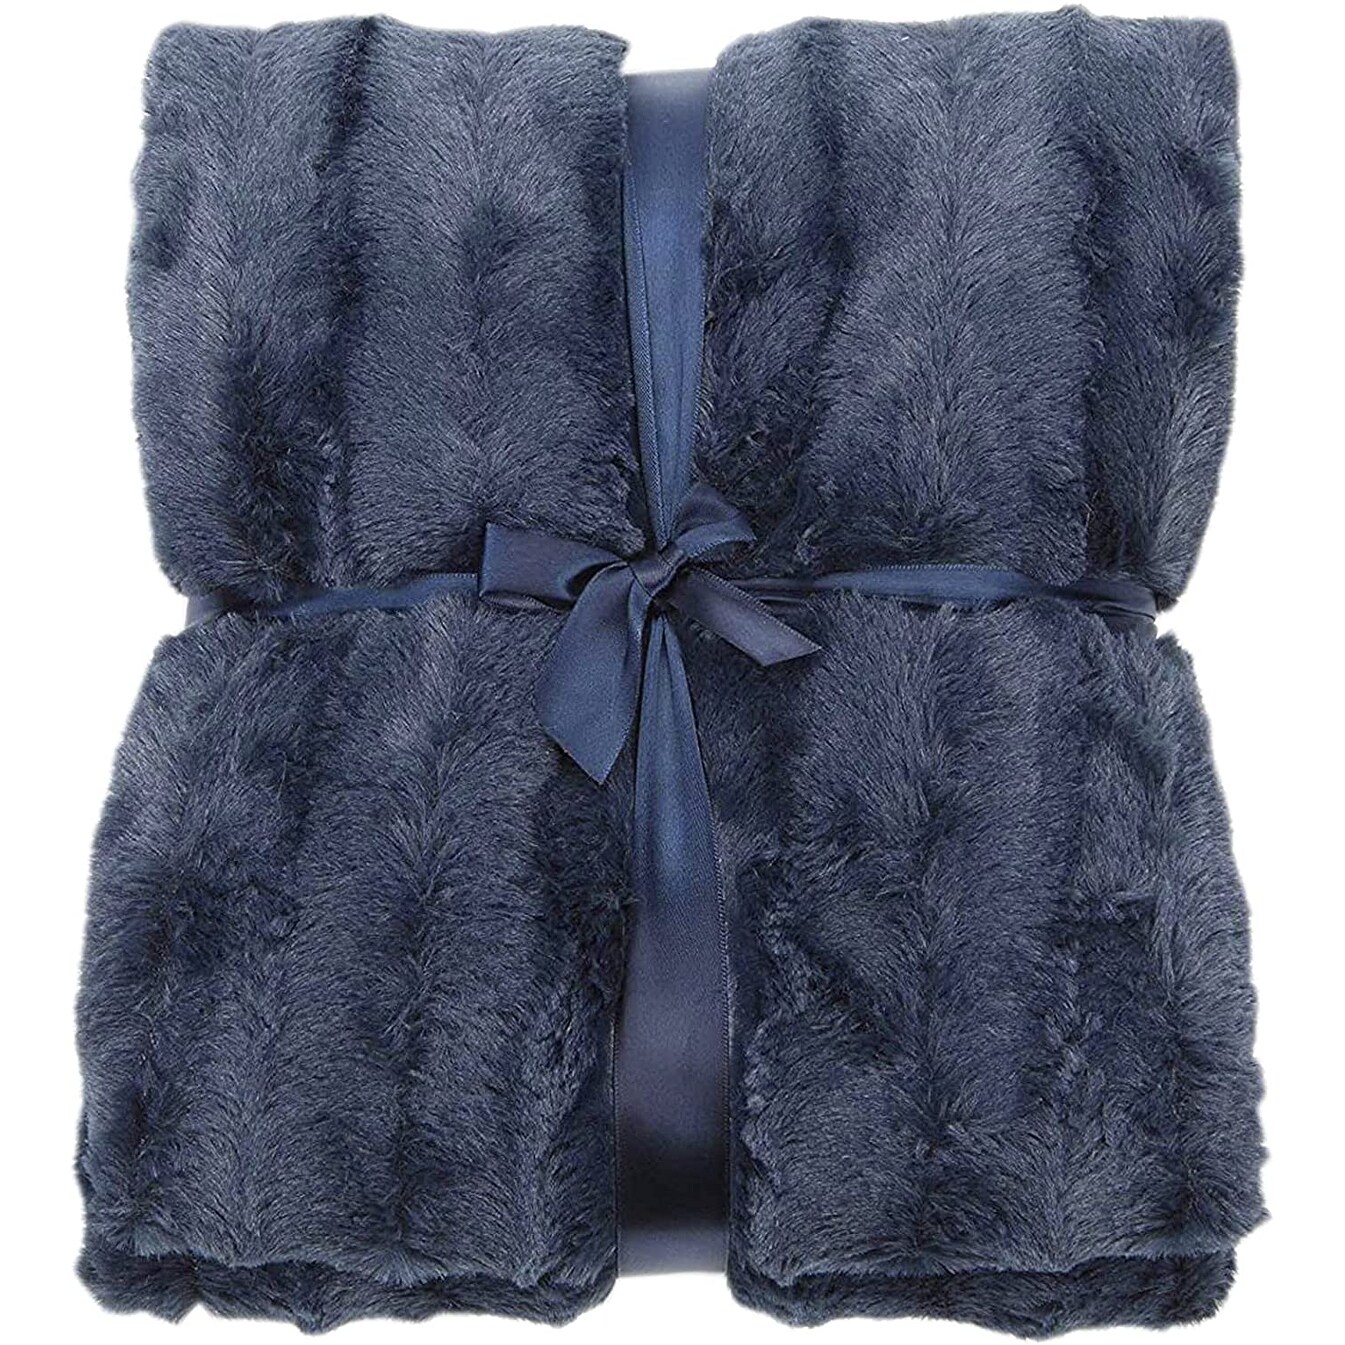 Luxurious Blanket for Couch Throw Blanket Chocolate Faux Fur Blanket Cheer Collection 40 x 50 inches 